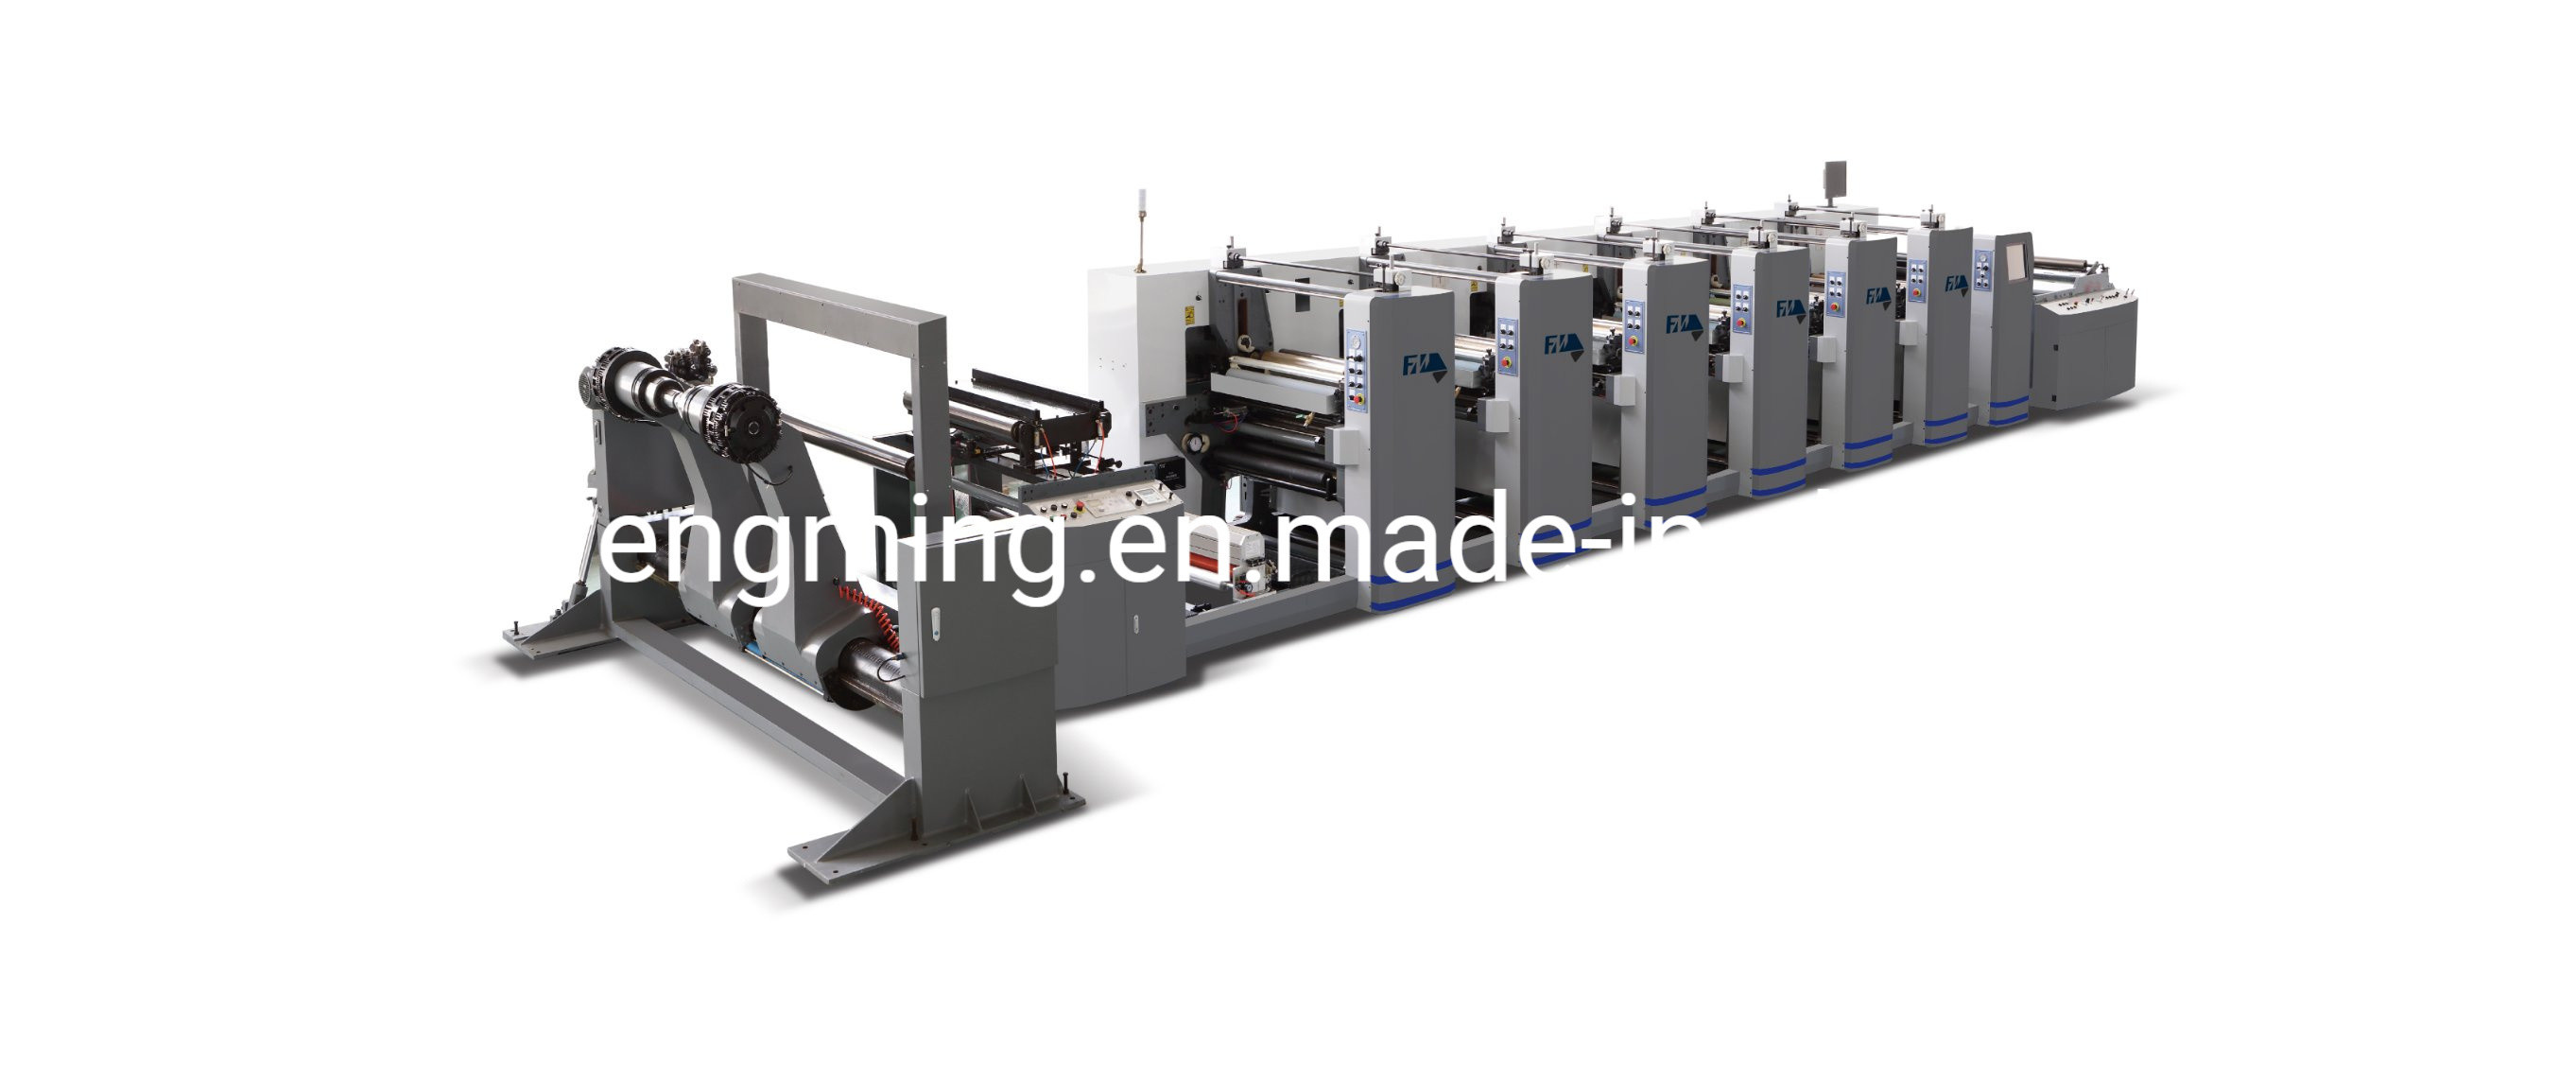 China High Speed Paper Bag/Paper Cup Printing Press Machine with Printing Speed of 150m/mim factory